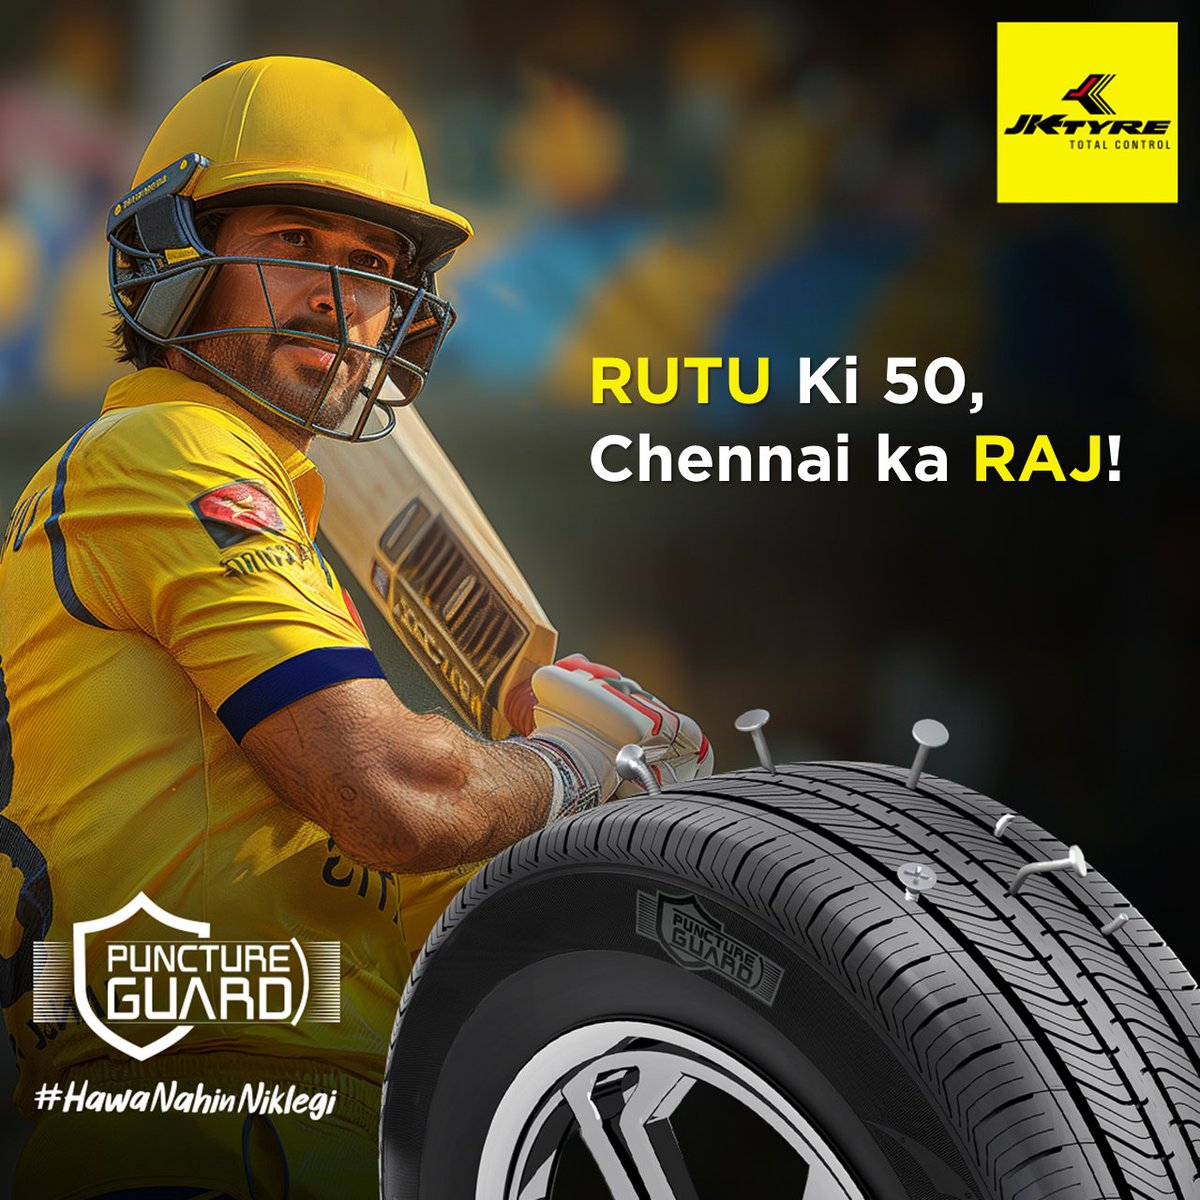 Captain leading from the front and protecting the team just like #PunctureGuard Tyre from JK Tyre that protects you from all the keels. Ab #HawaNahinNiklegi #JKTyre #IndianT20League #Chennai #Punjab